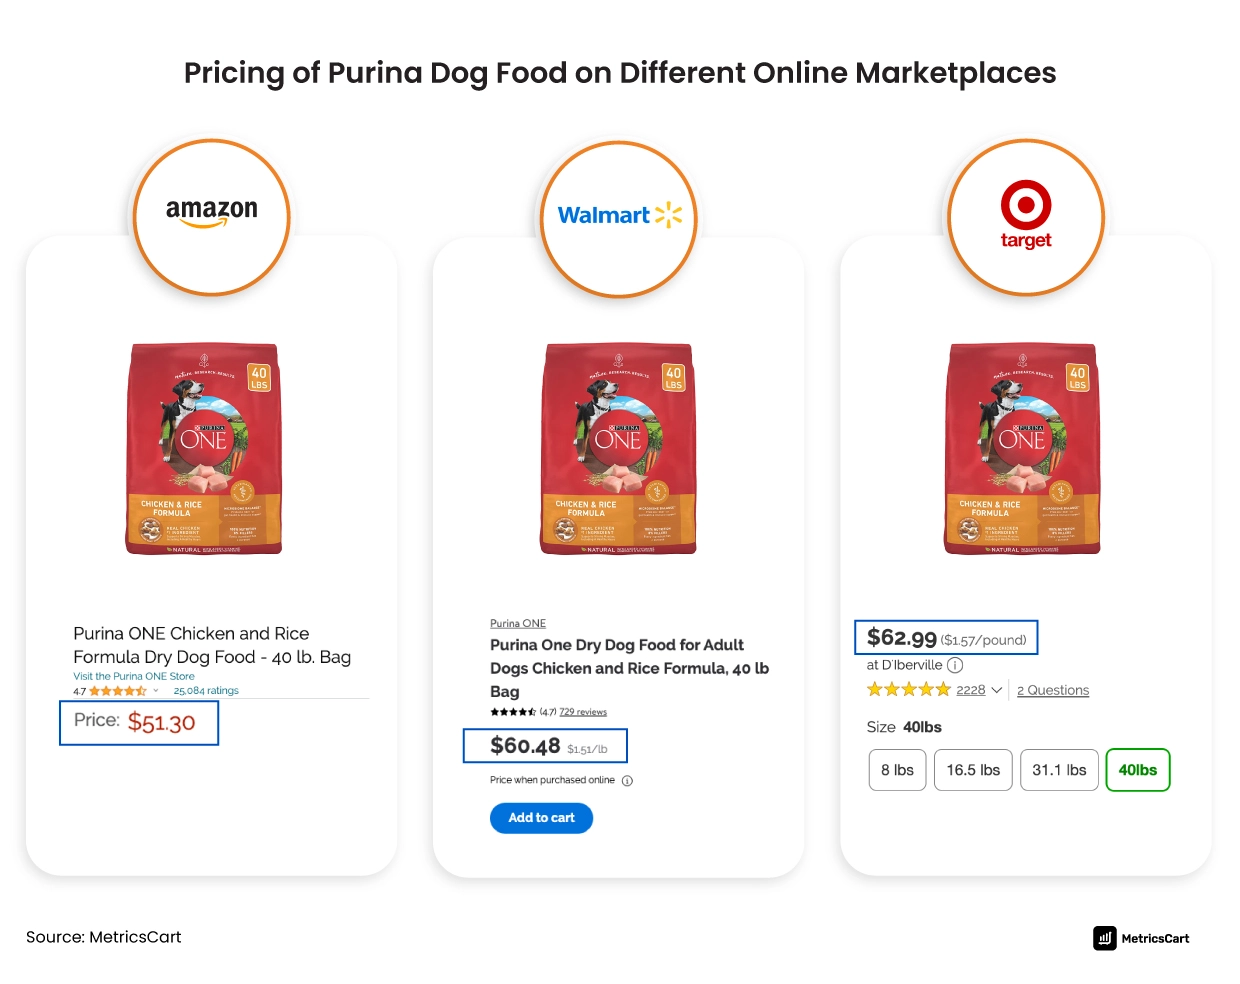 Amazon seller pricing compared to walmart and target